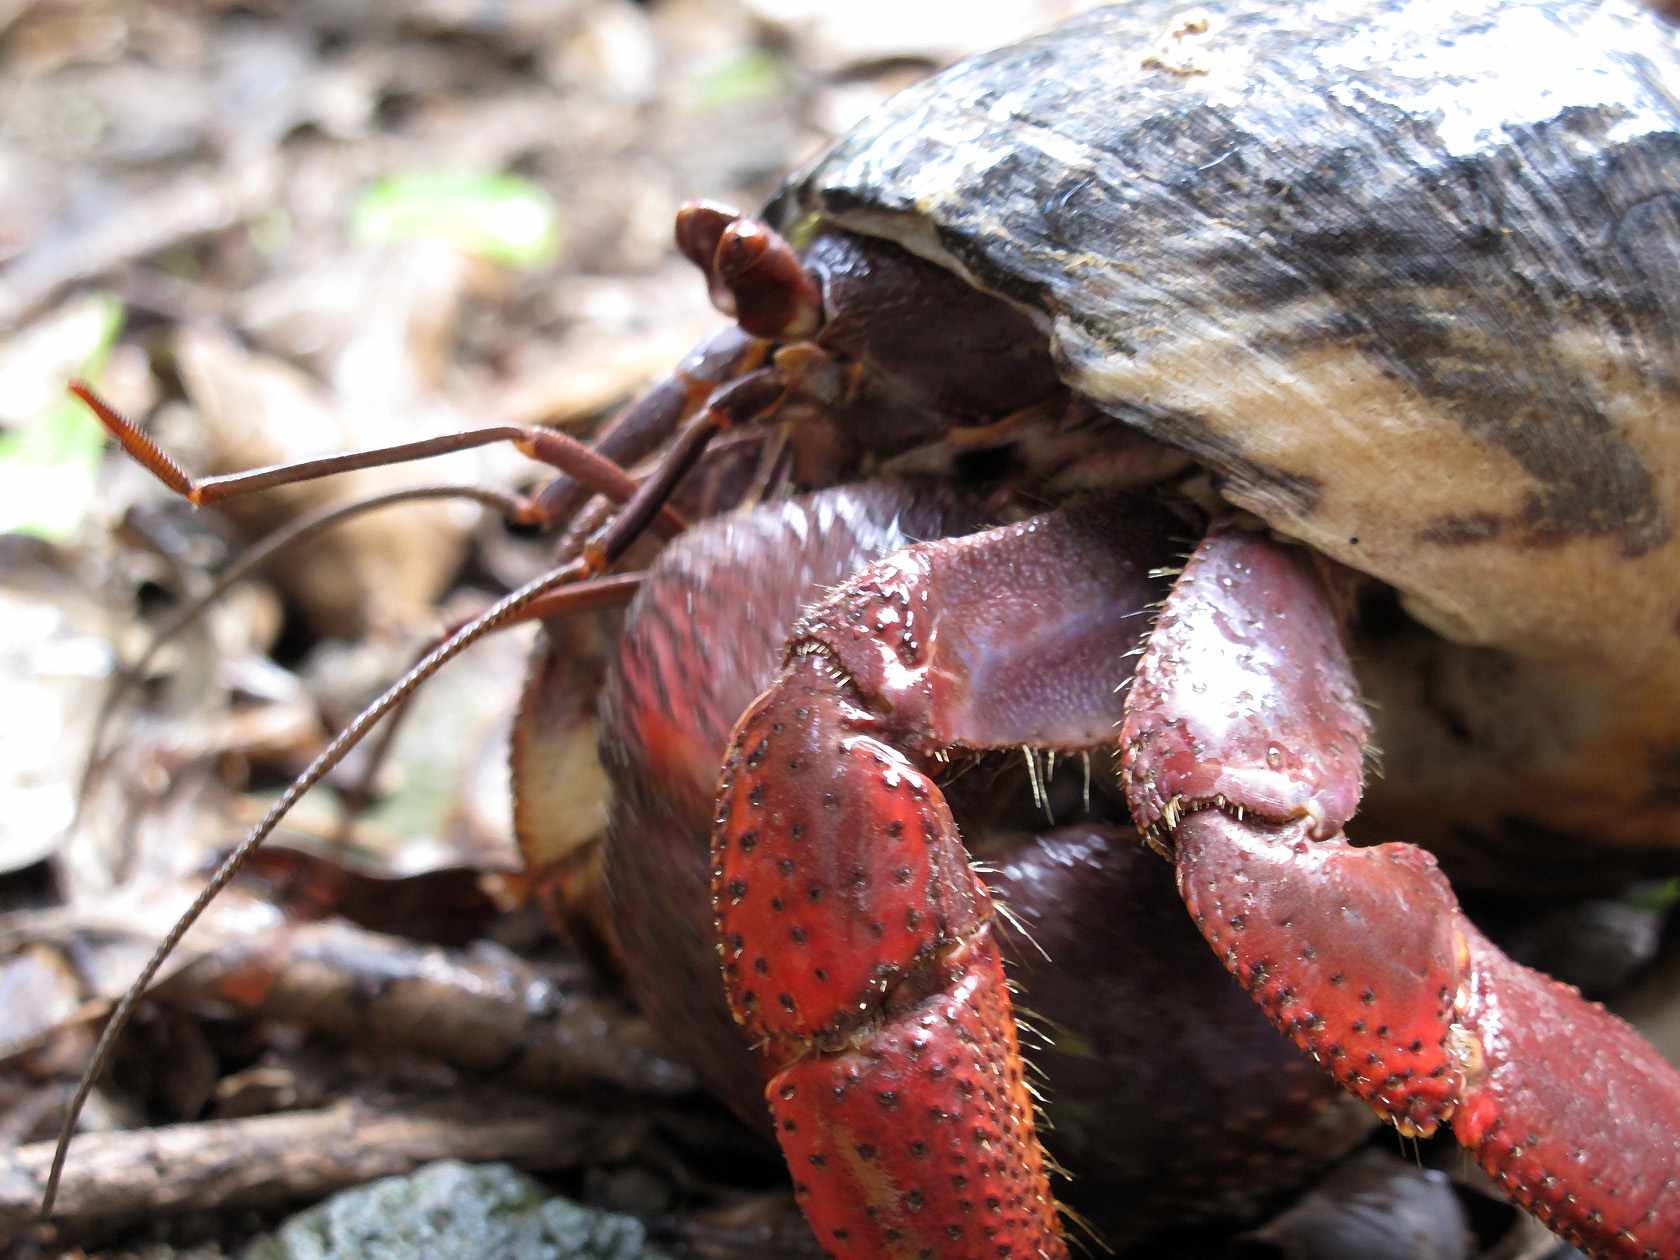 Close-up of a hermit crab